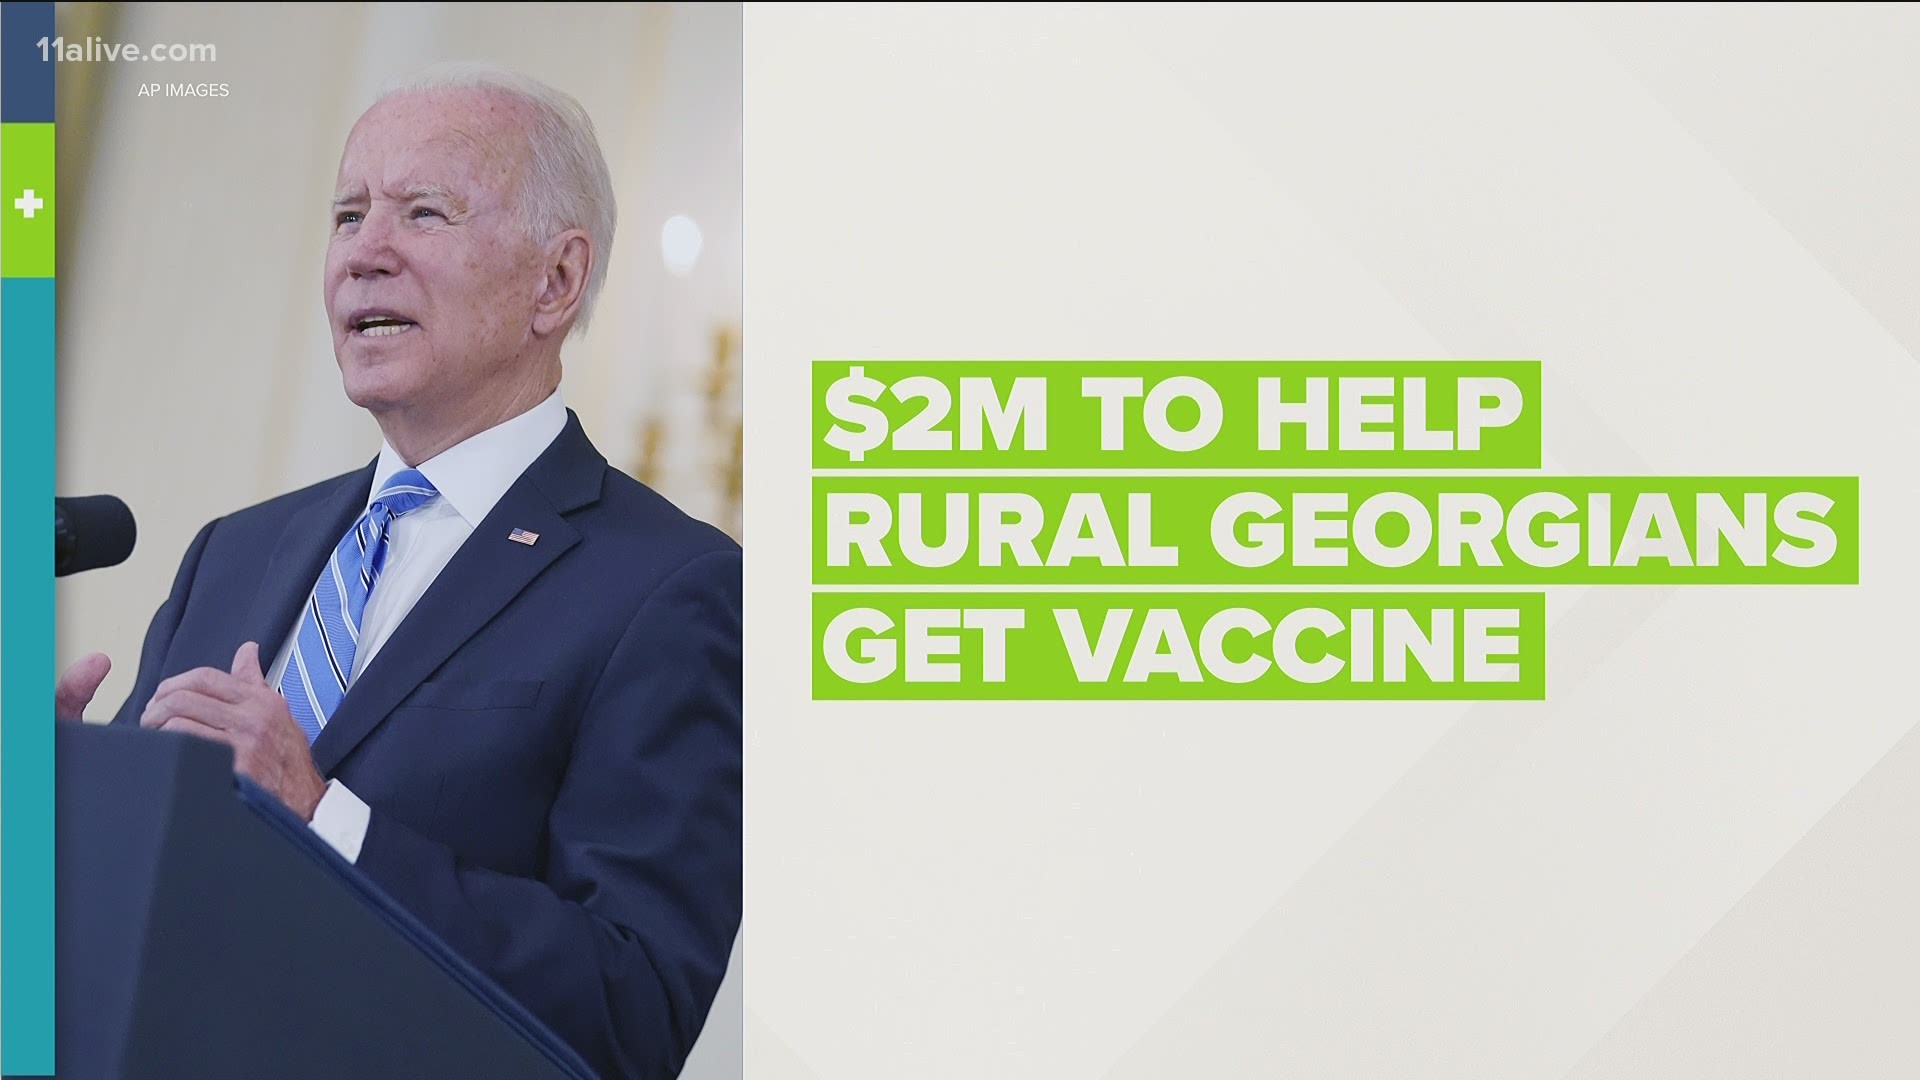 The president announced $2M will go to rural health clinics in the state.